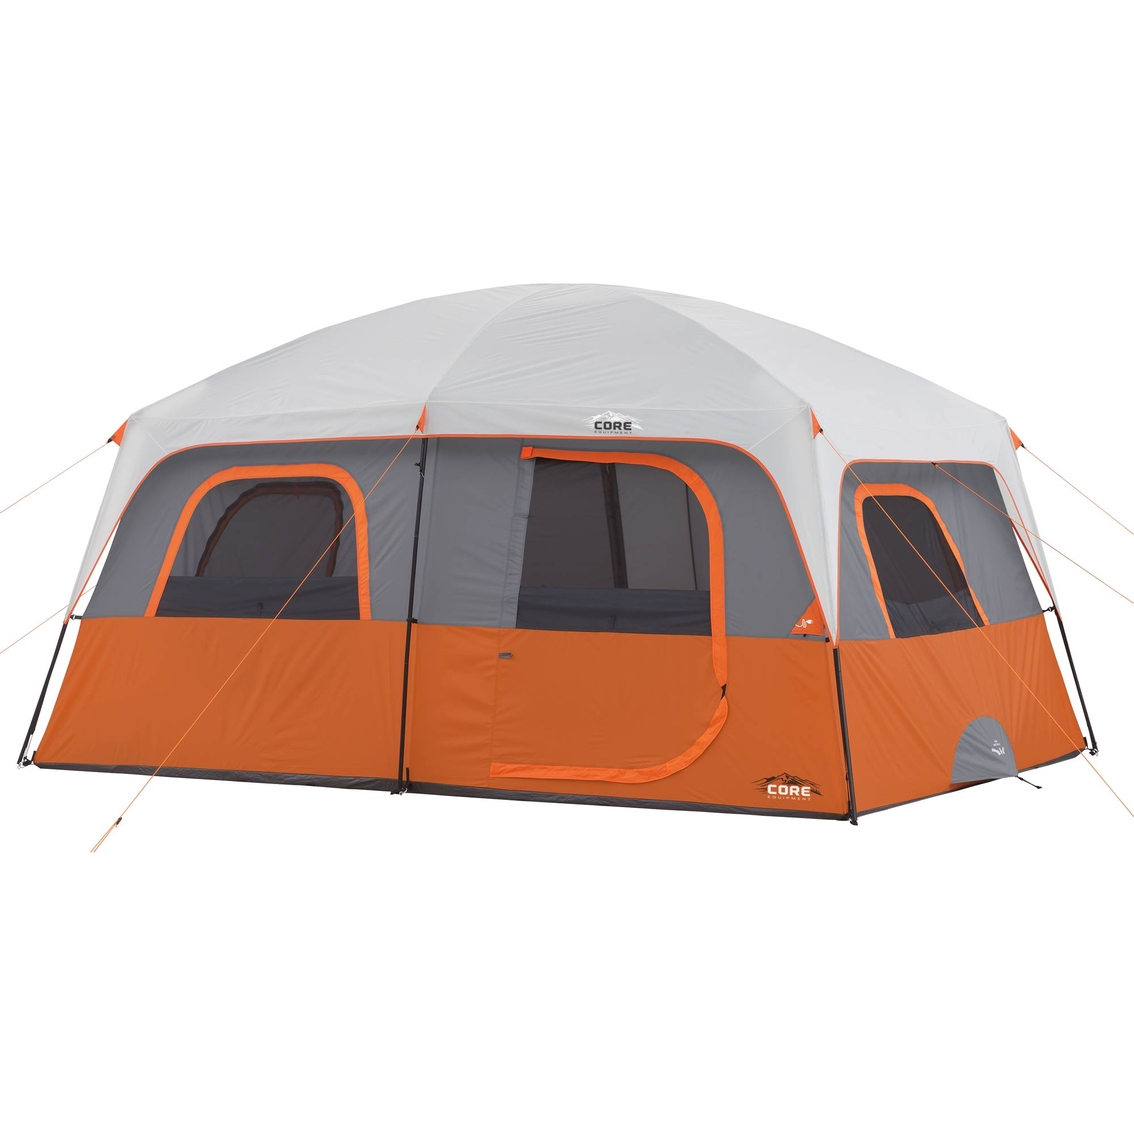 Core Equipment 10 Person Straight Wall Cabin Tent | Tents | Sports ...